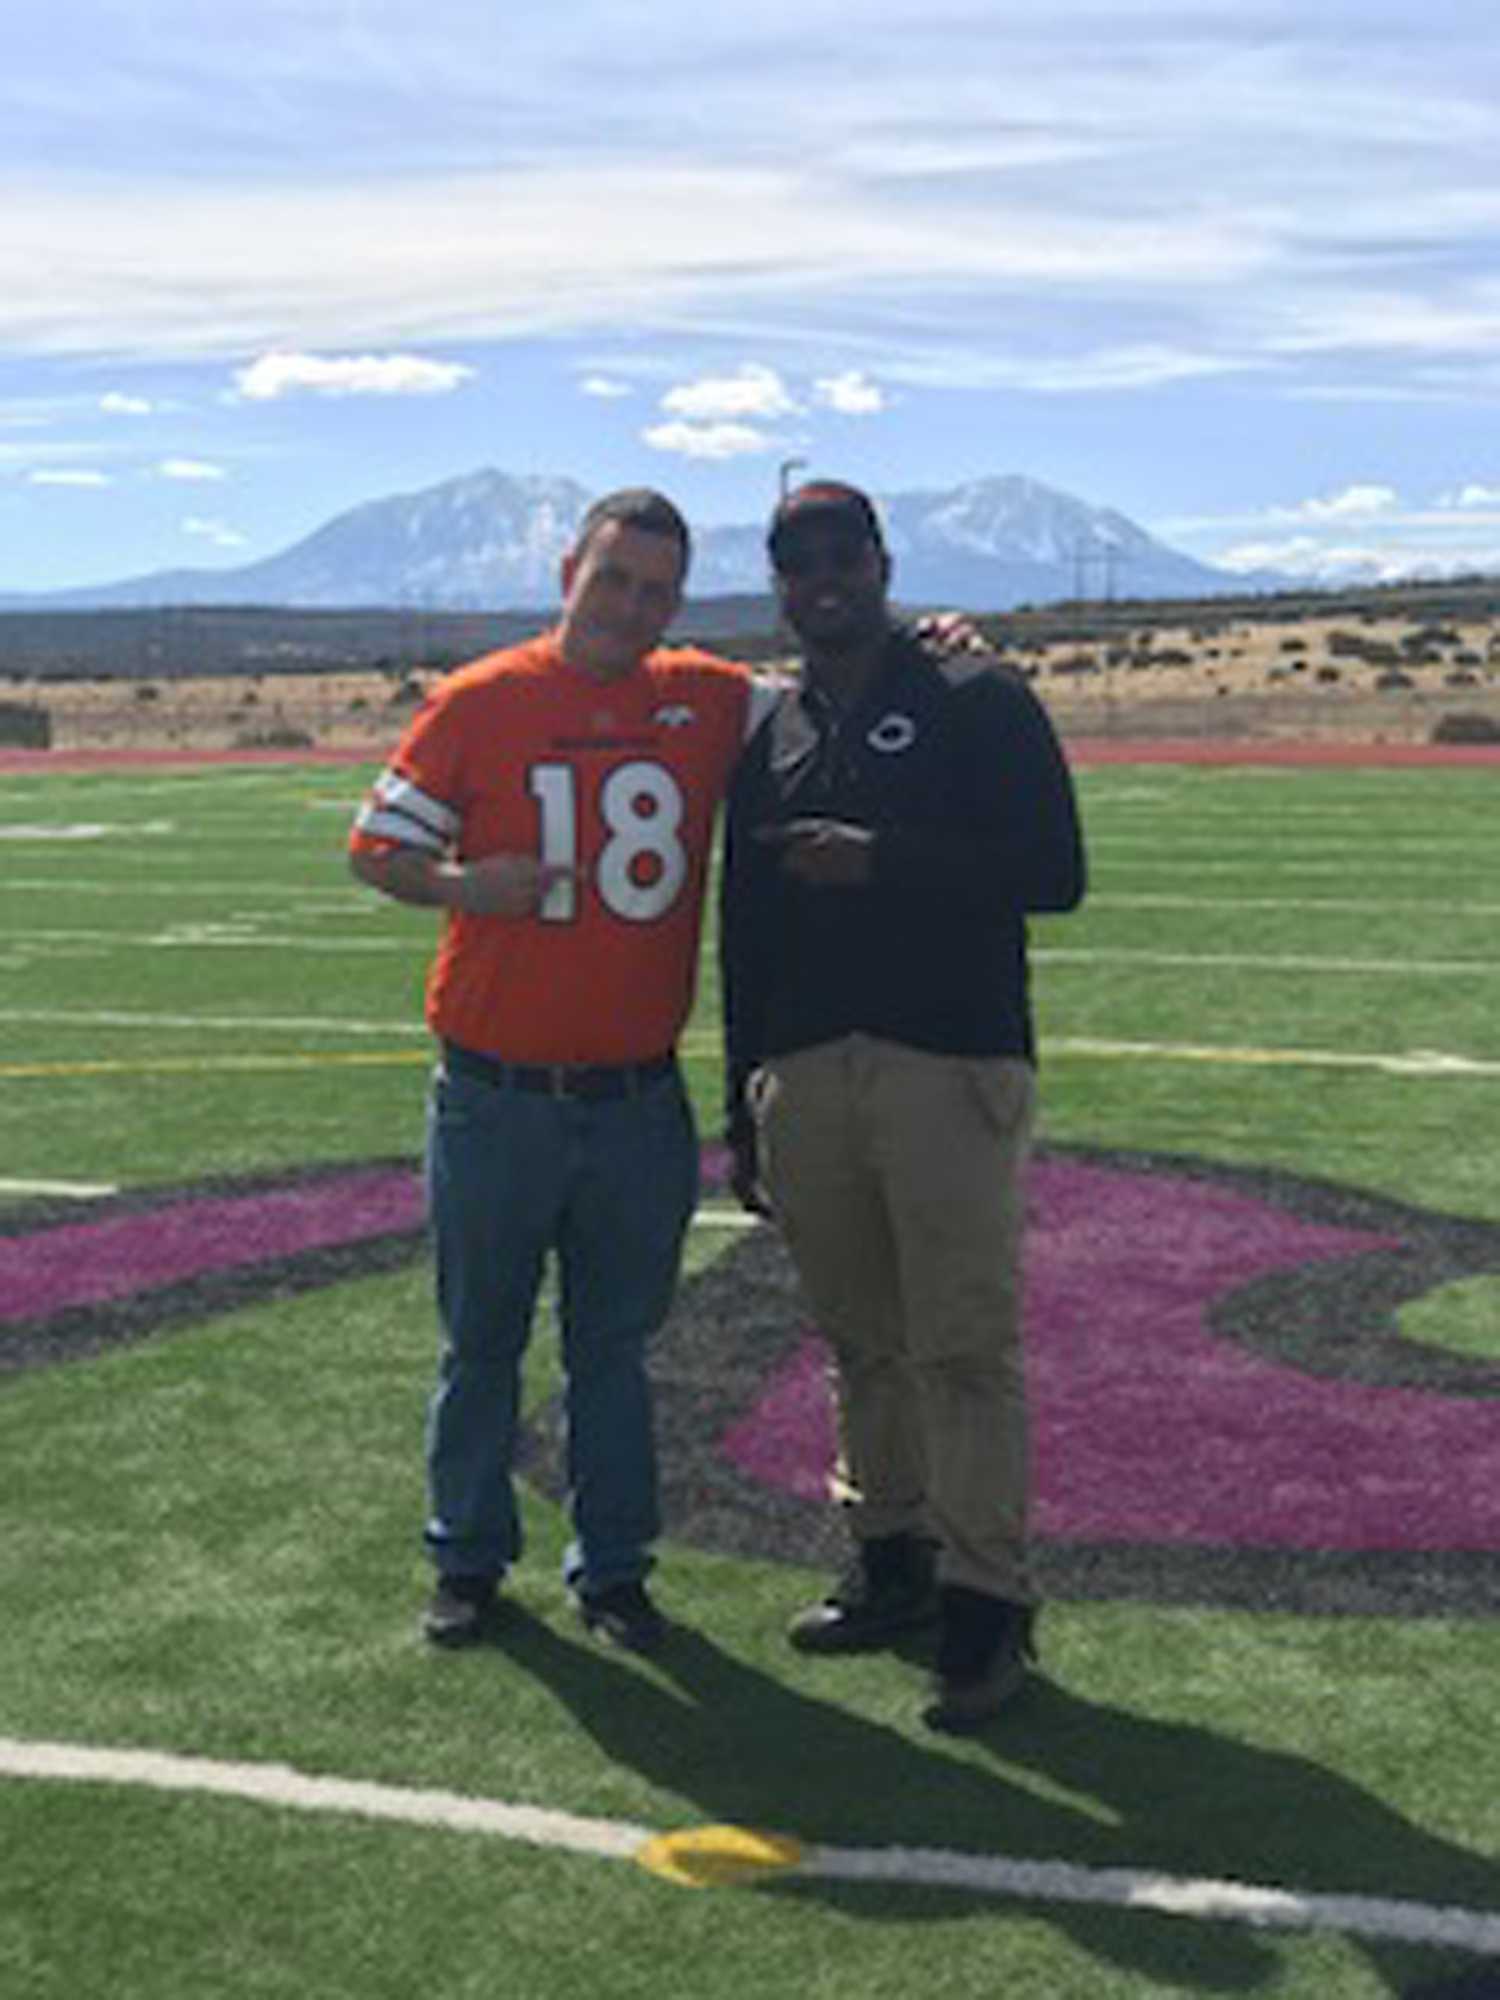 PRO FOOTBALL COMES TO WALSENBURG – The World Journal